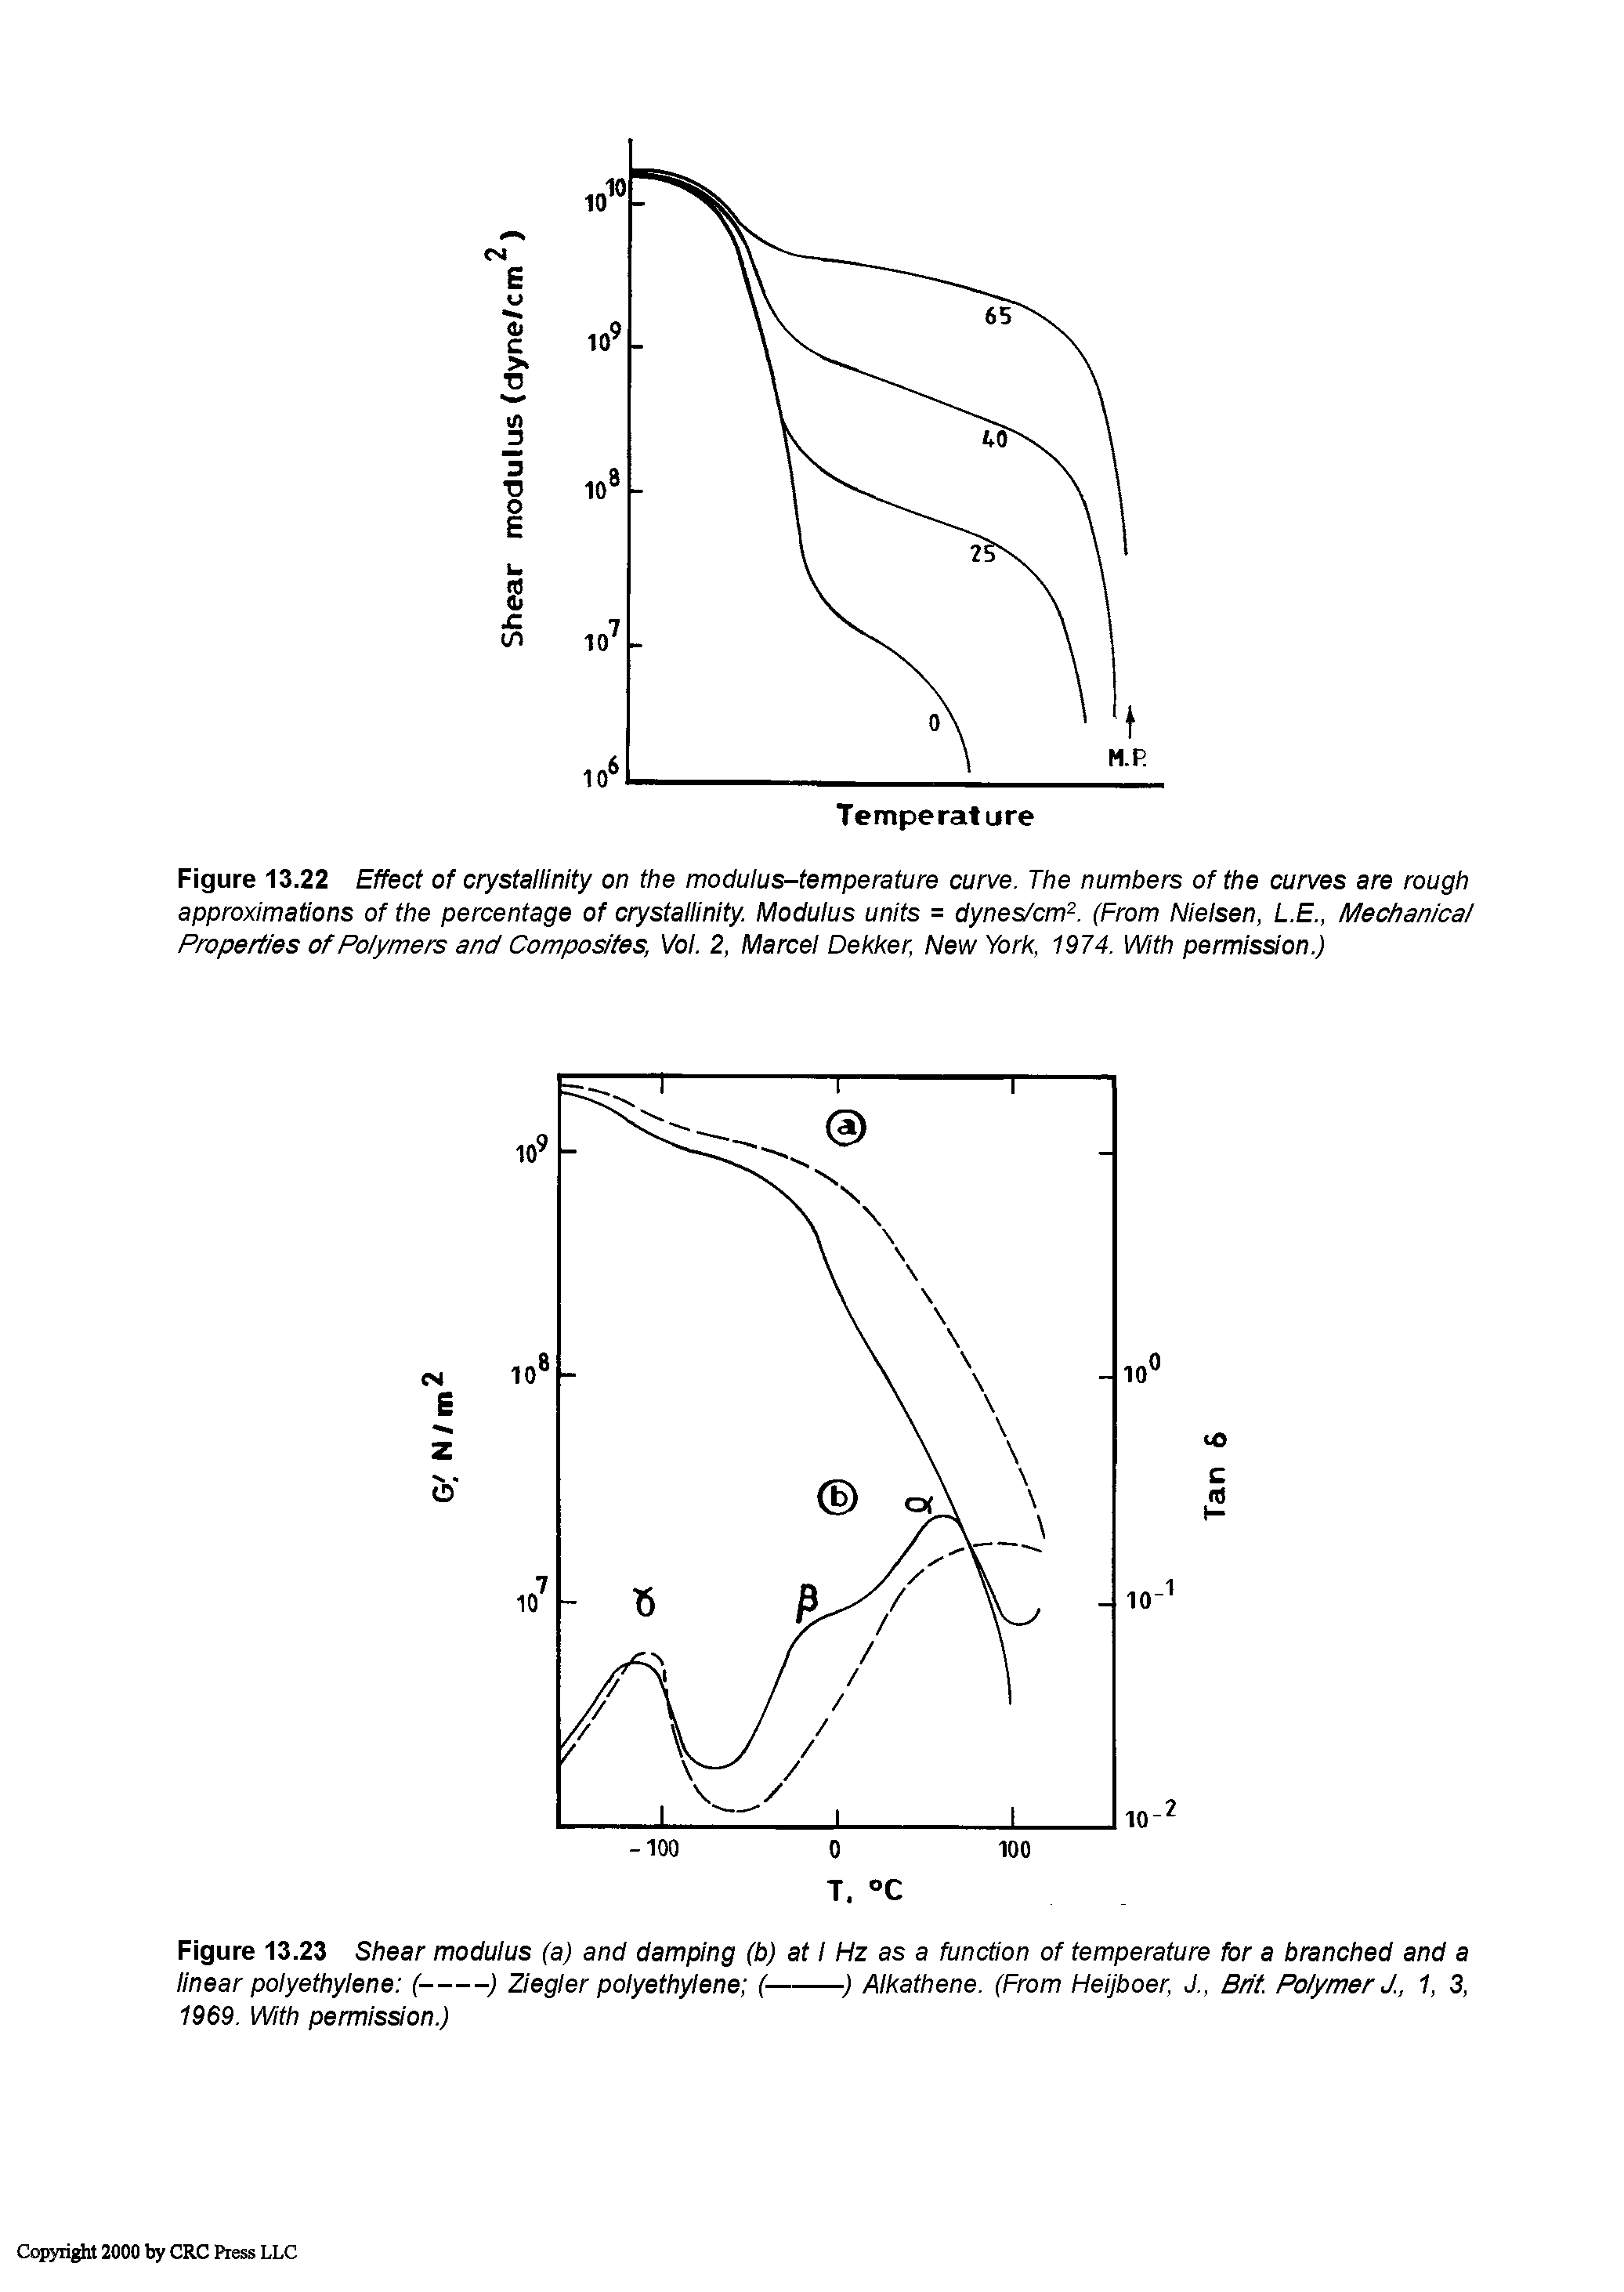 Figure 13.22 Effect of crystallinity on the modulus-temperature curve. The numbers of the curves are rough approximations of the percentage of crystallinity. Modulus units = dynes/cm. (From Nielsen, L.E., Mechanical Properties of Polymers and Composites, Vol. 2, Marcel Dekker, New York, 1974. With permission.)...